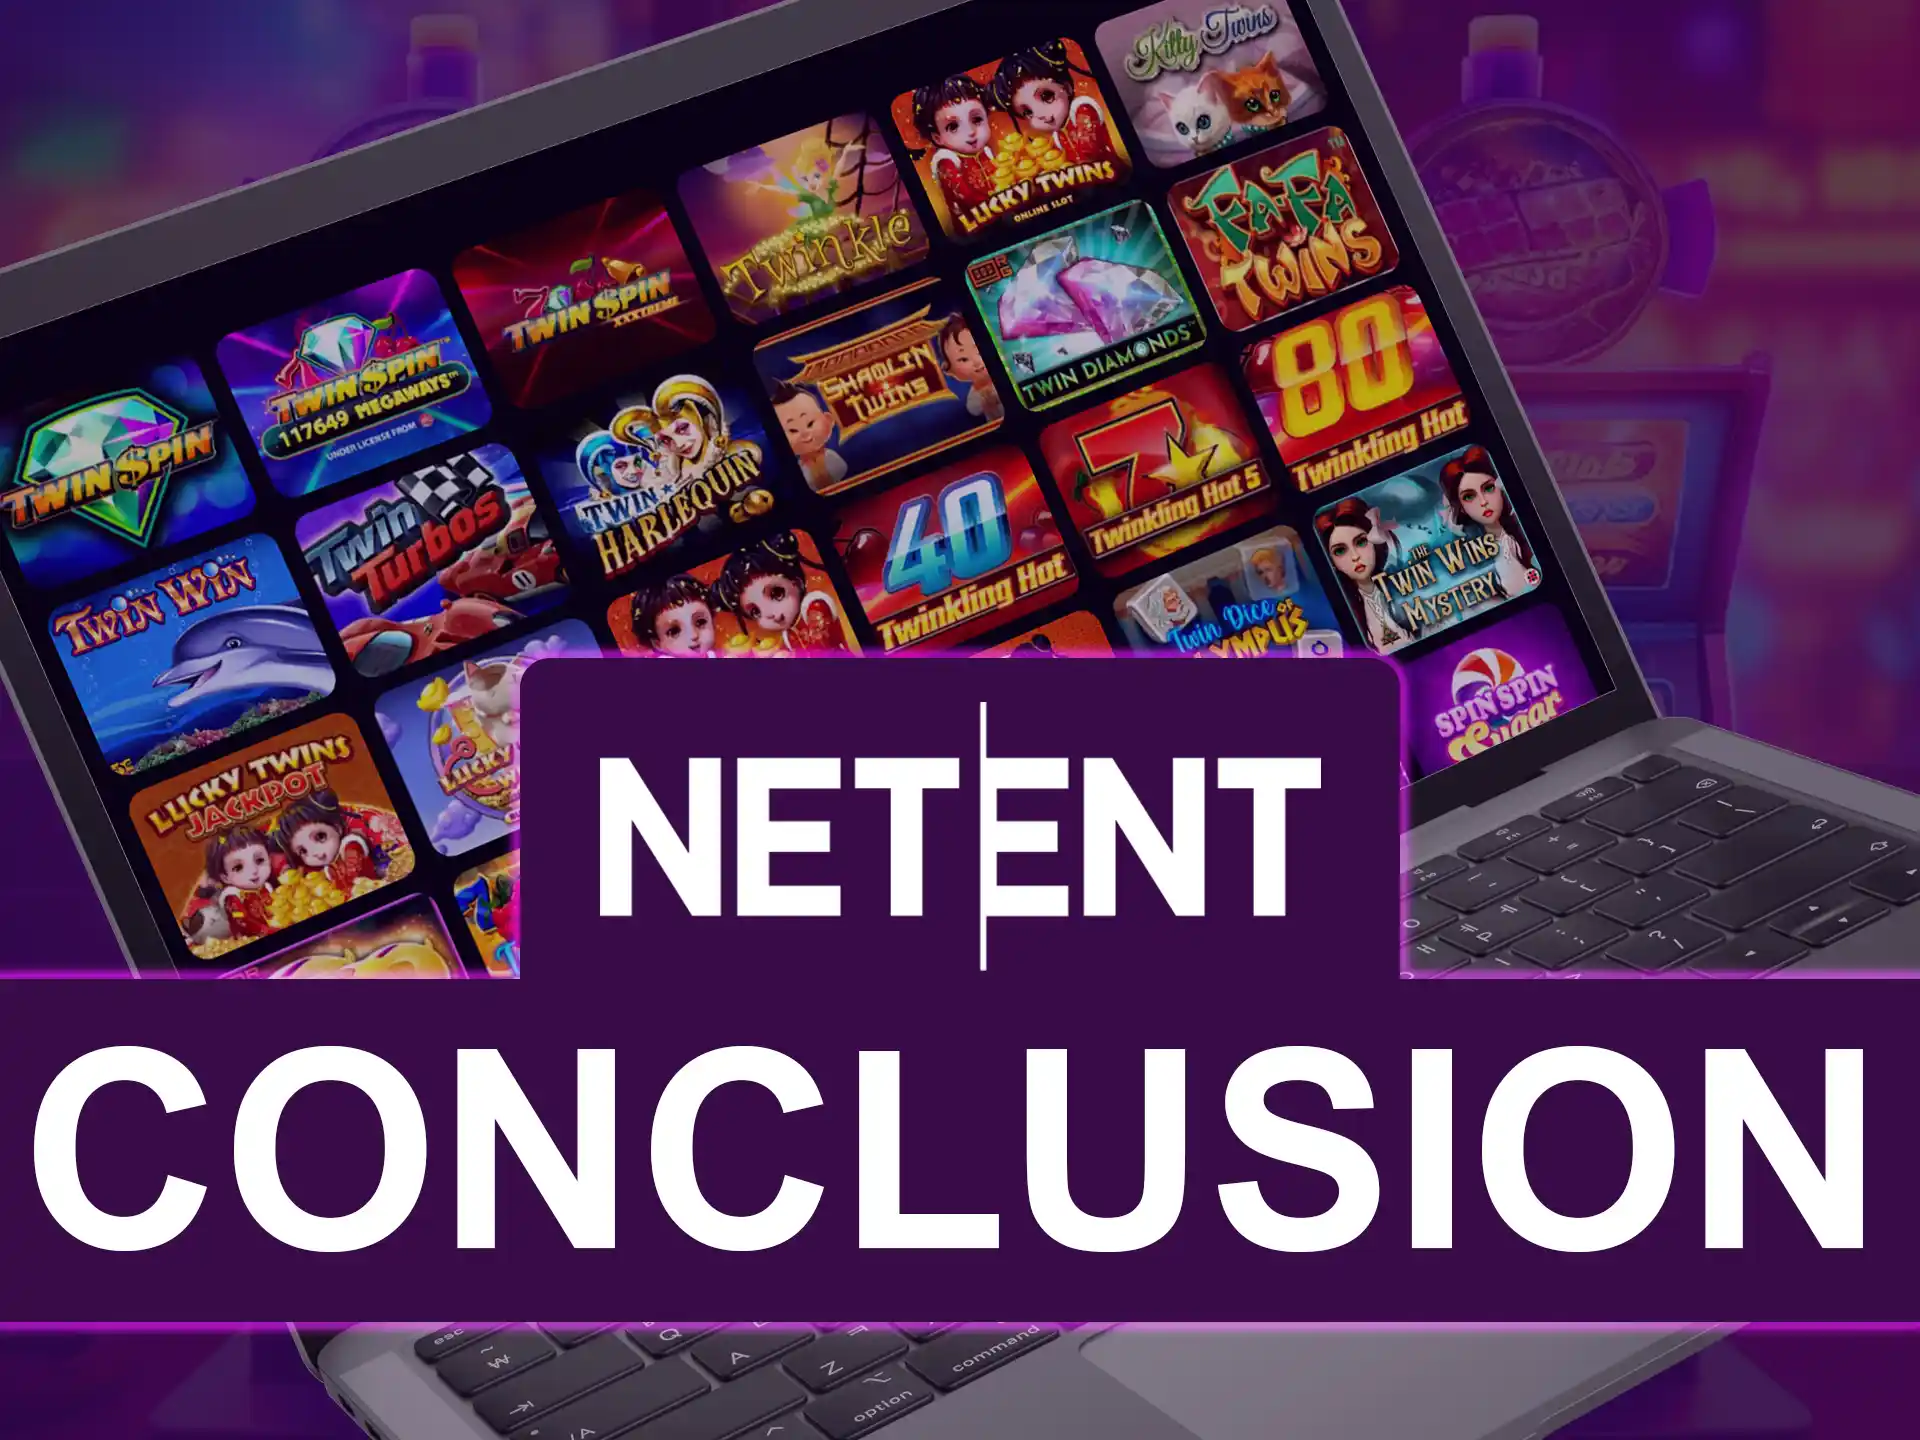 Netent Provider produces quality games and only works with trusted global casinos.